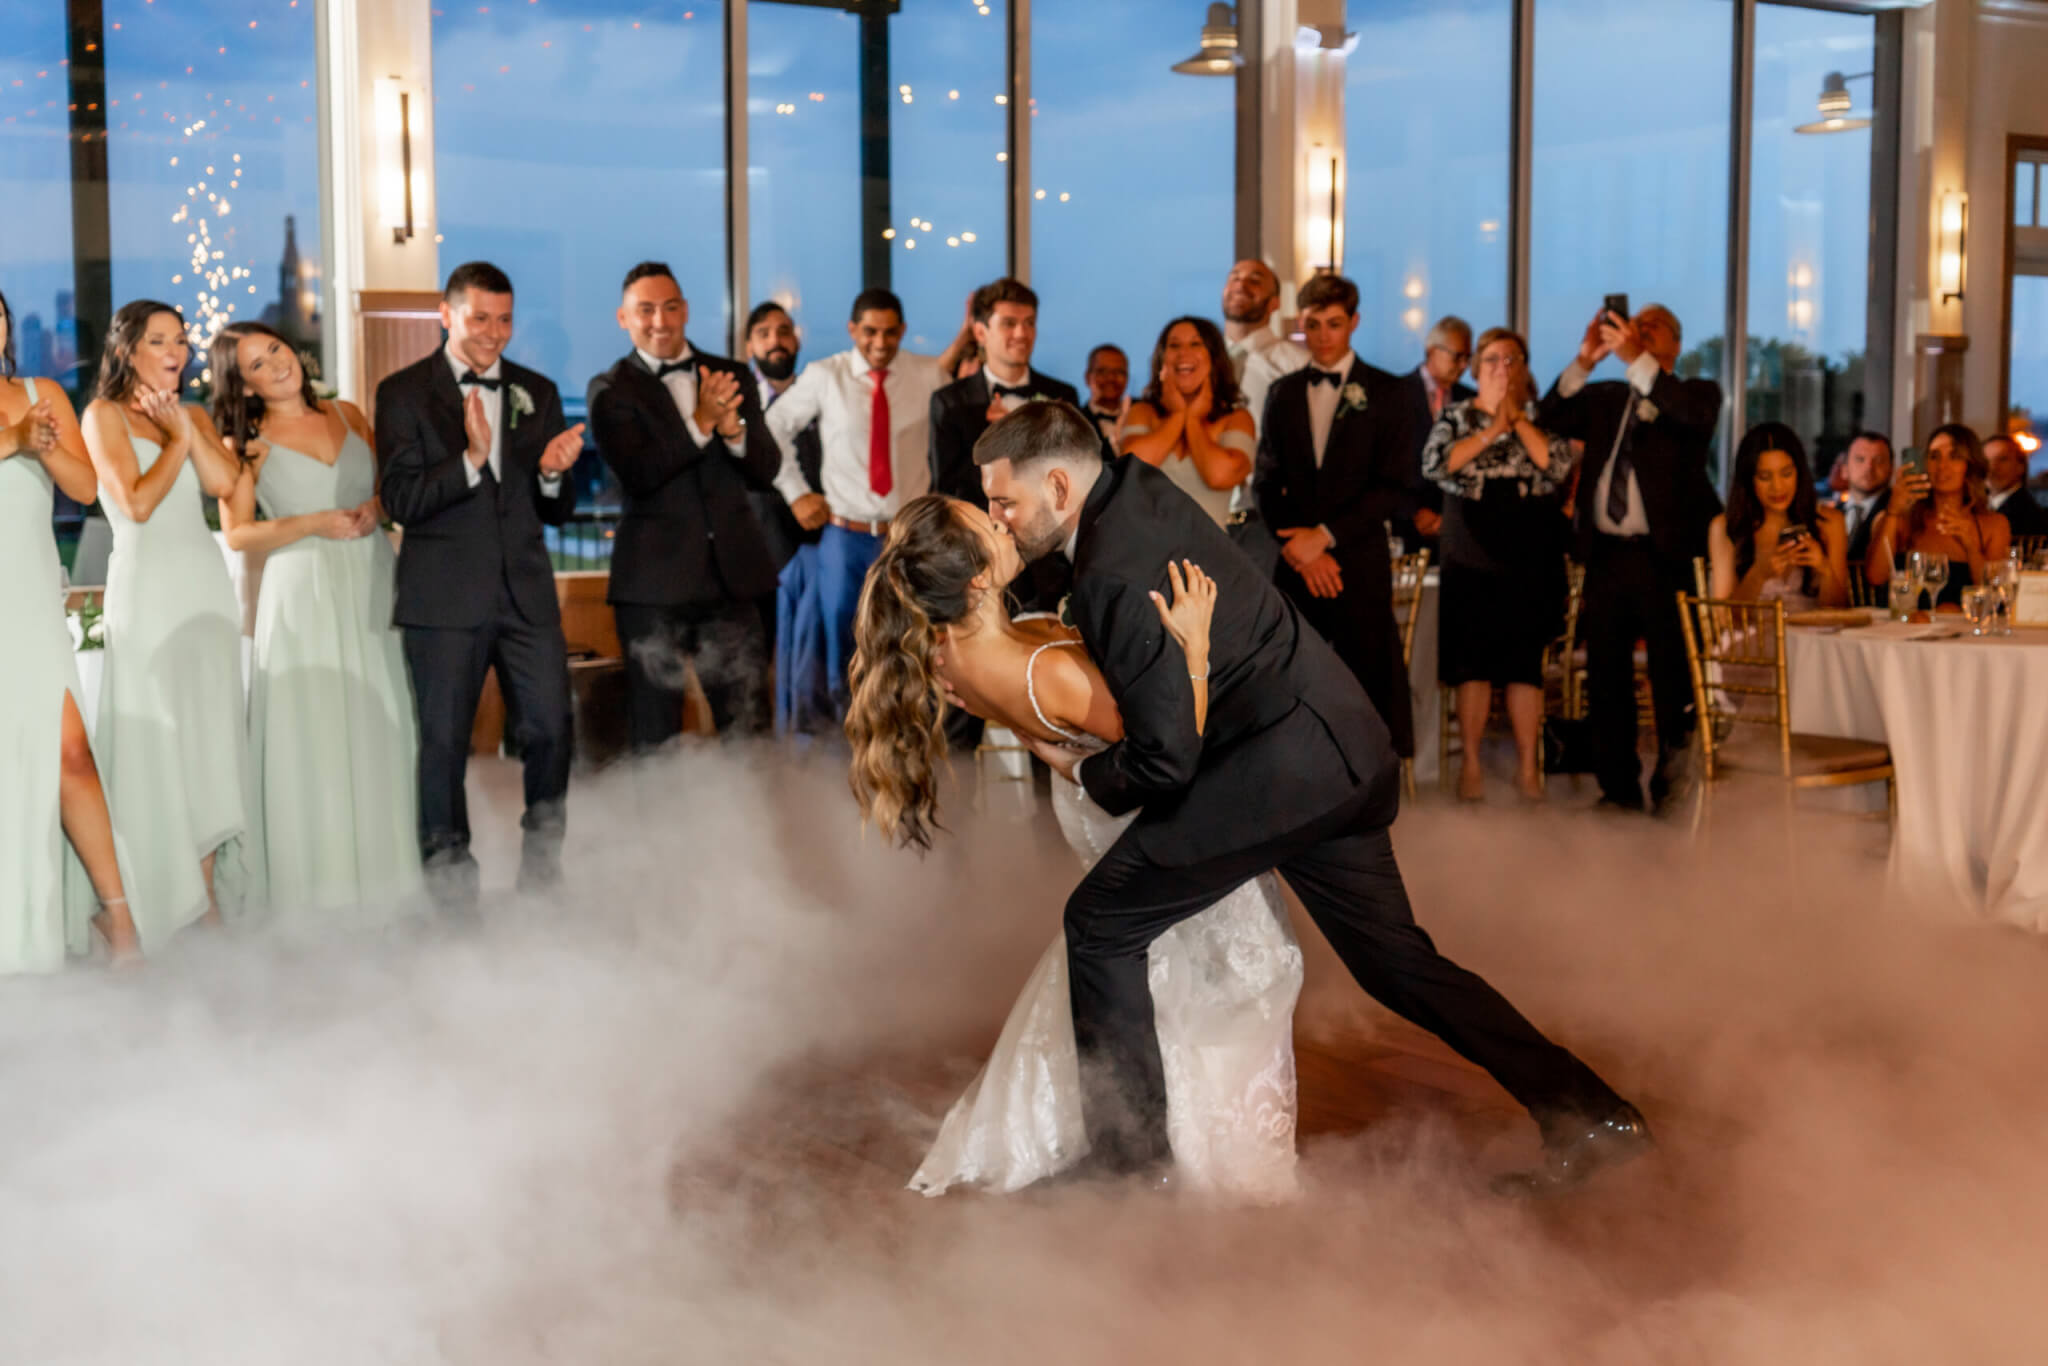 5 Reasons Why You Should Choreograph Your First Dance